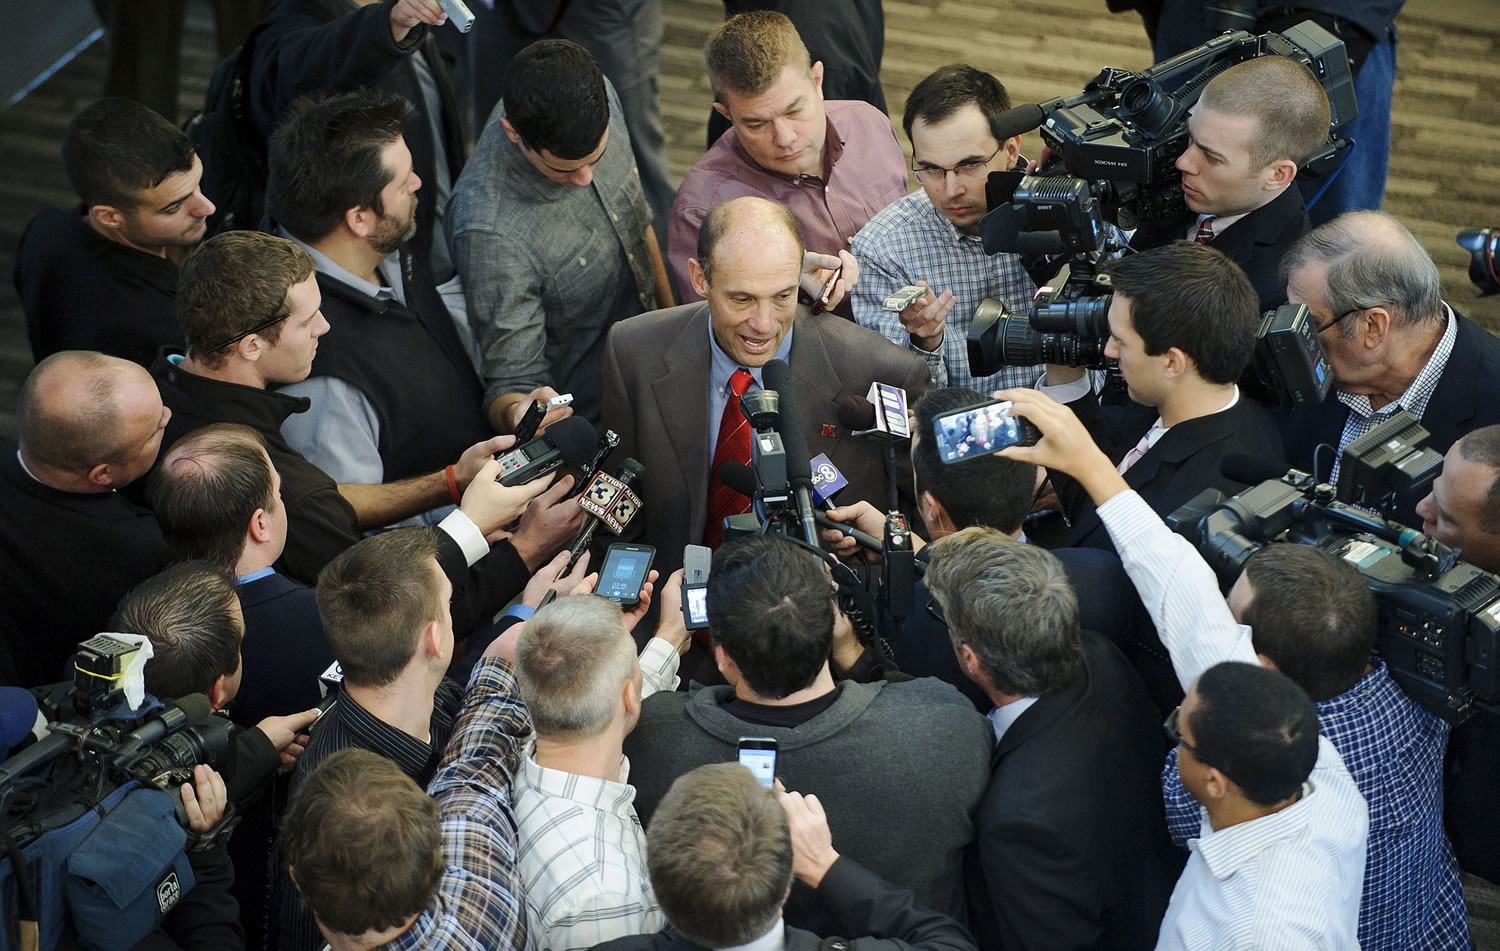 Nebraska's new football coach Mike Riley is swarmed by the media after a news conference at Memorial Stadium on Friday, Dec. 5, 2014 in Lincoln, Neb. Riley, who came from Oregon State, replaces Bo Pelini who was fired last Sunday.